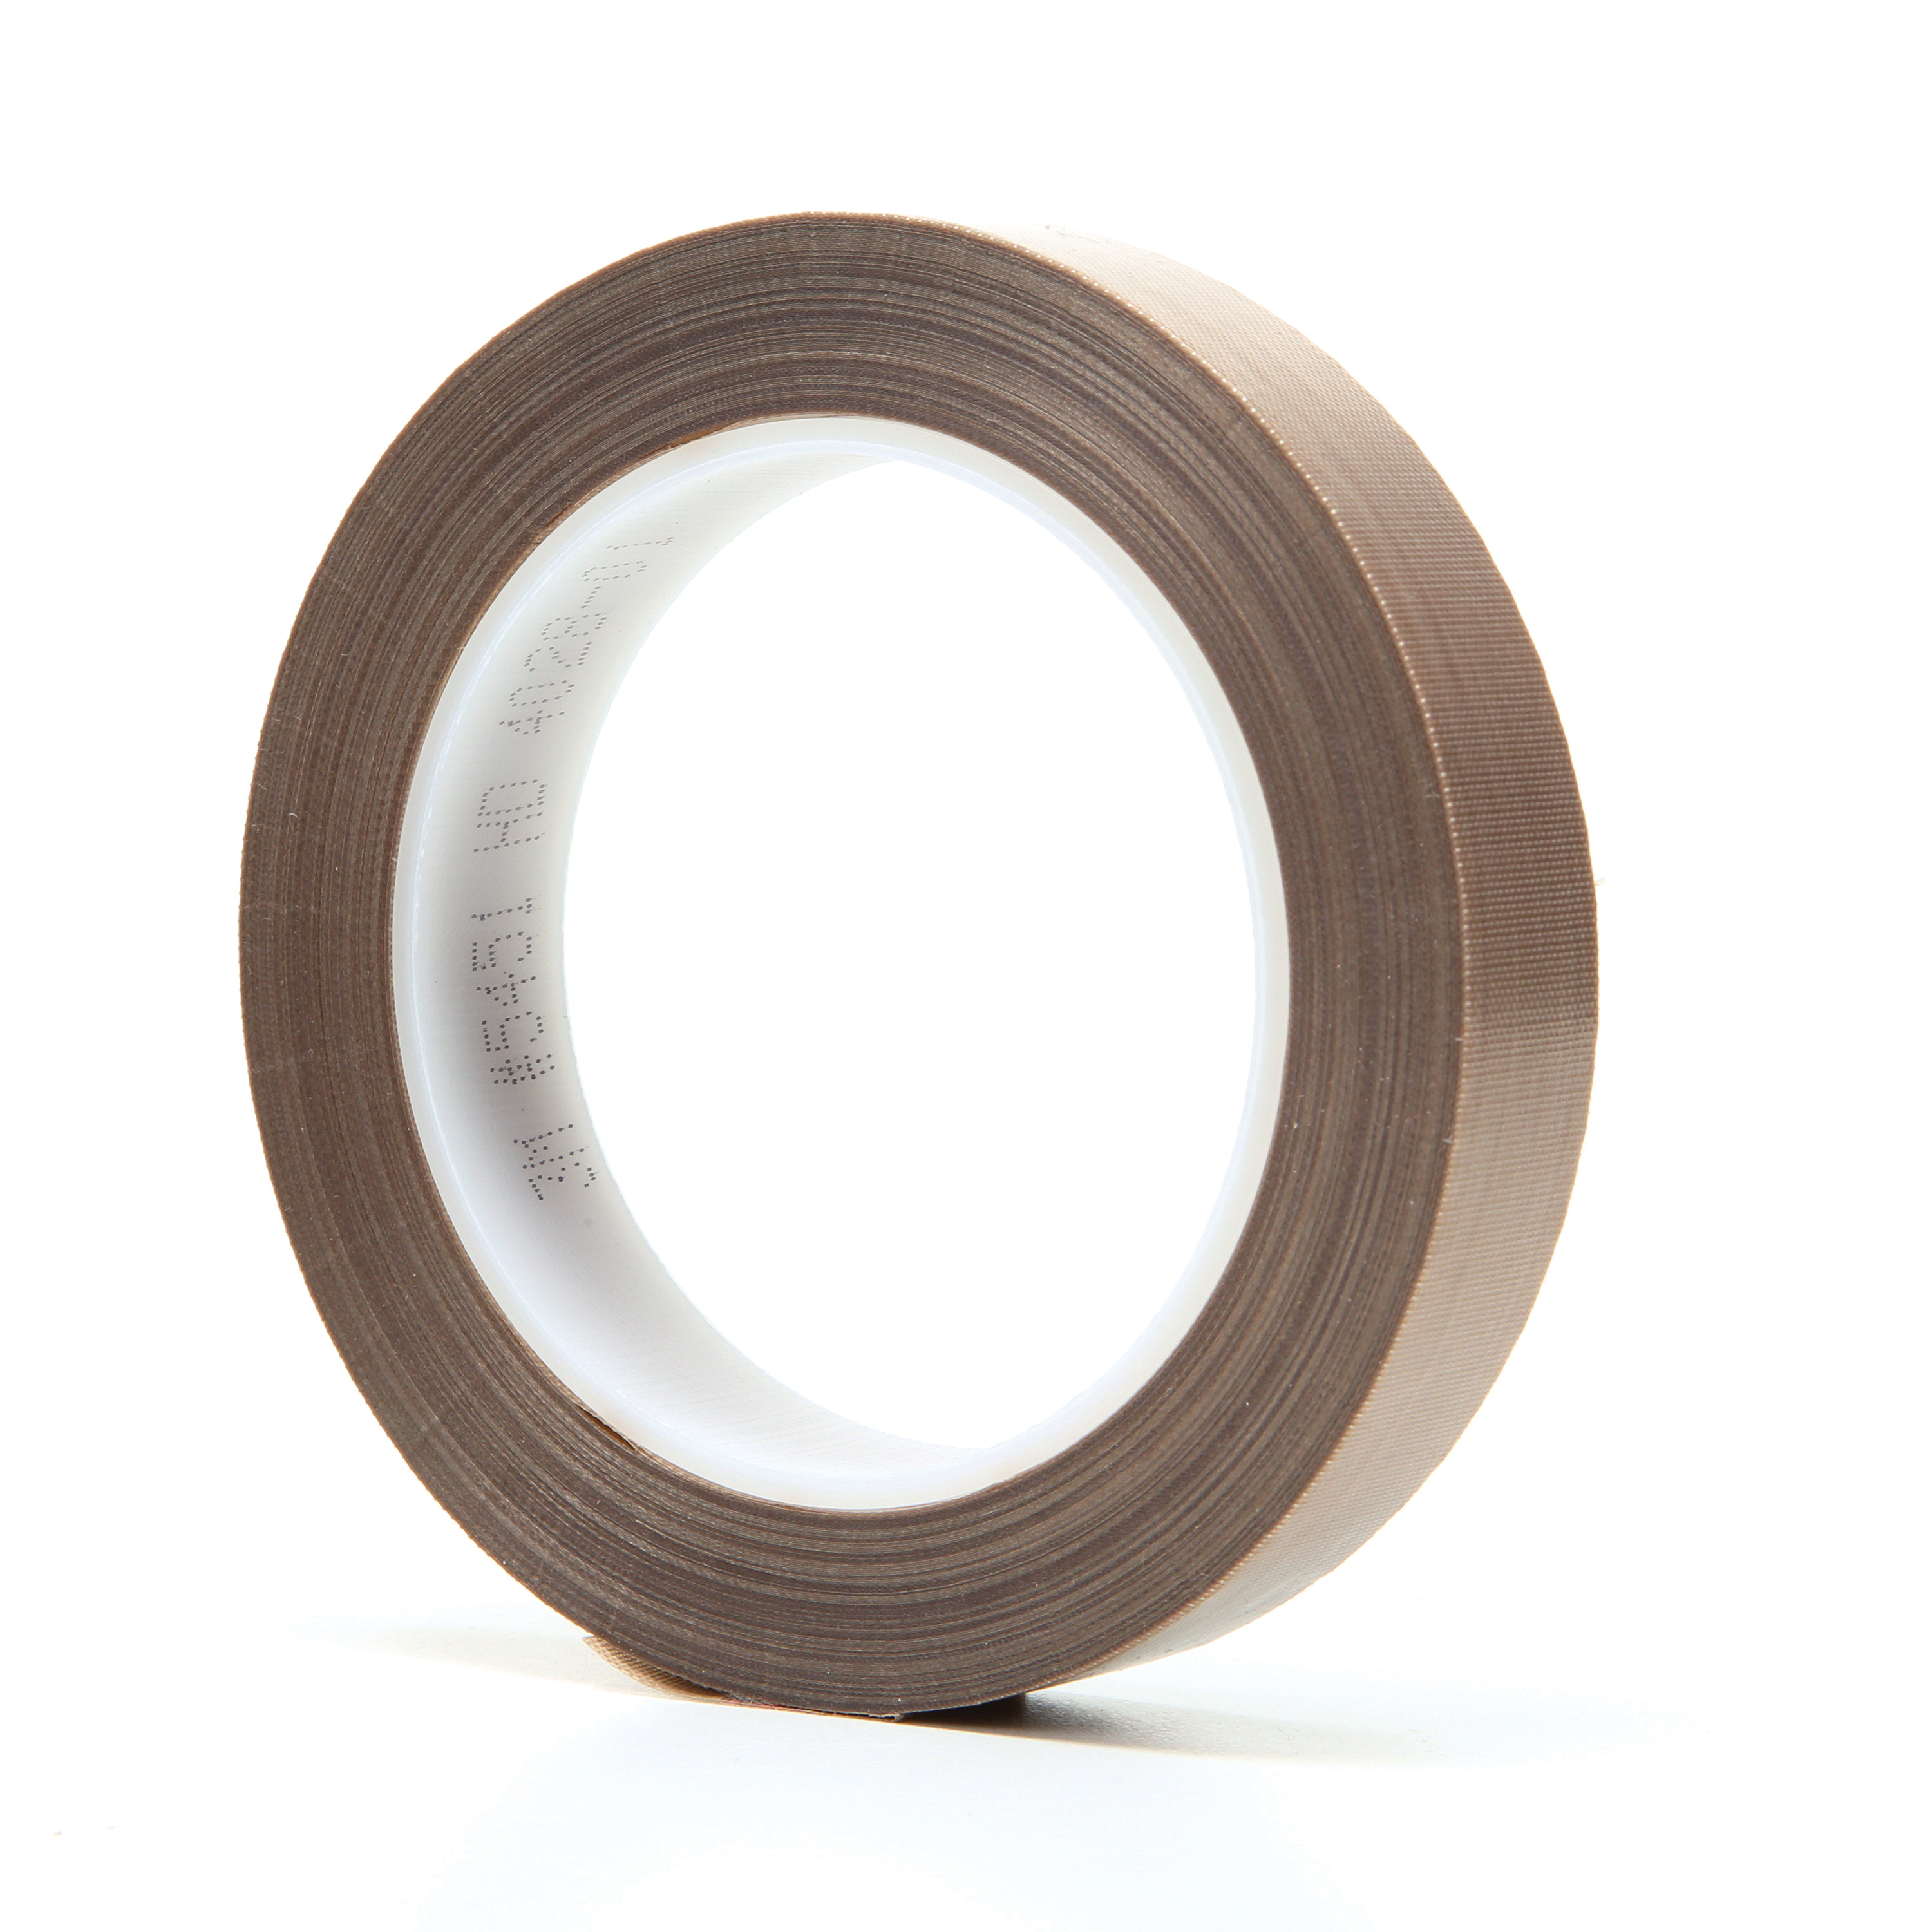 3M™ 021200-16151 Pressure Sensitive Glass Cloth Tape, 36 yd L x 3/4 in W, 5.6 mil THK, Silicon Adhesive, Woven Glass Cloth Impregnated with PTFE Backing, Brown